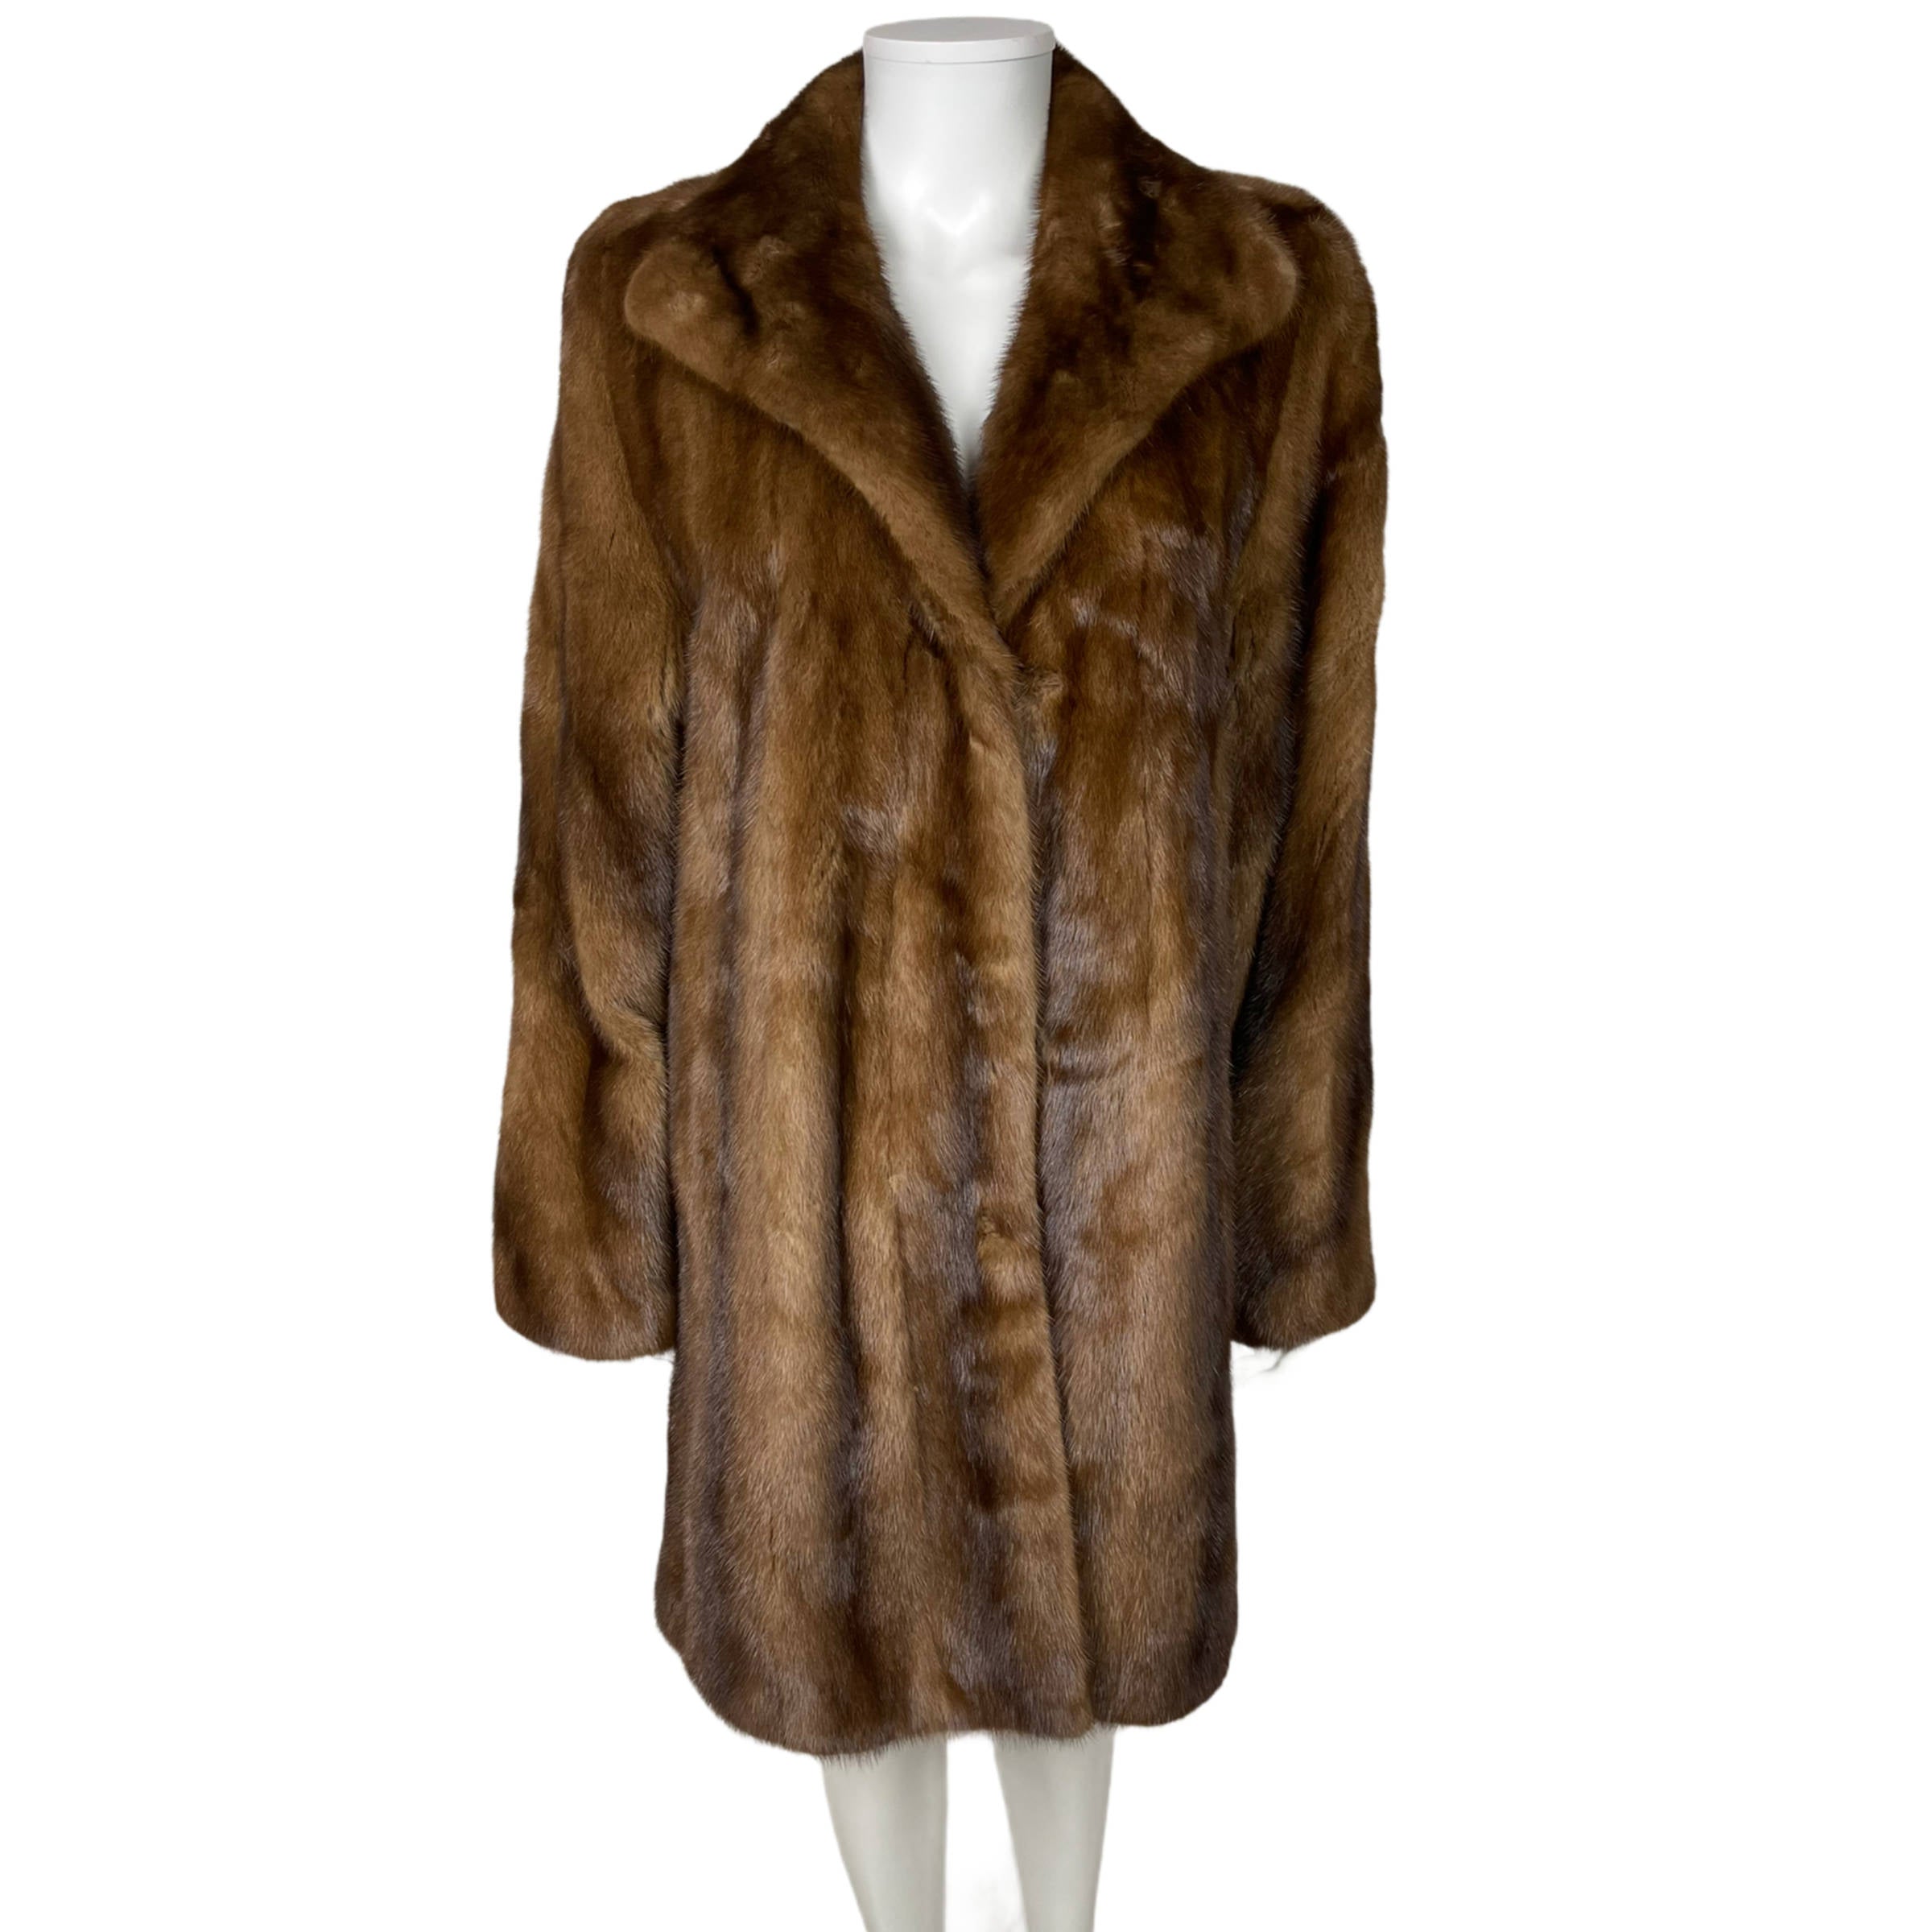 Reversible Sheared MINK LOUIS FERAUD Coat Size: L. FRANCE, New with tag